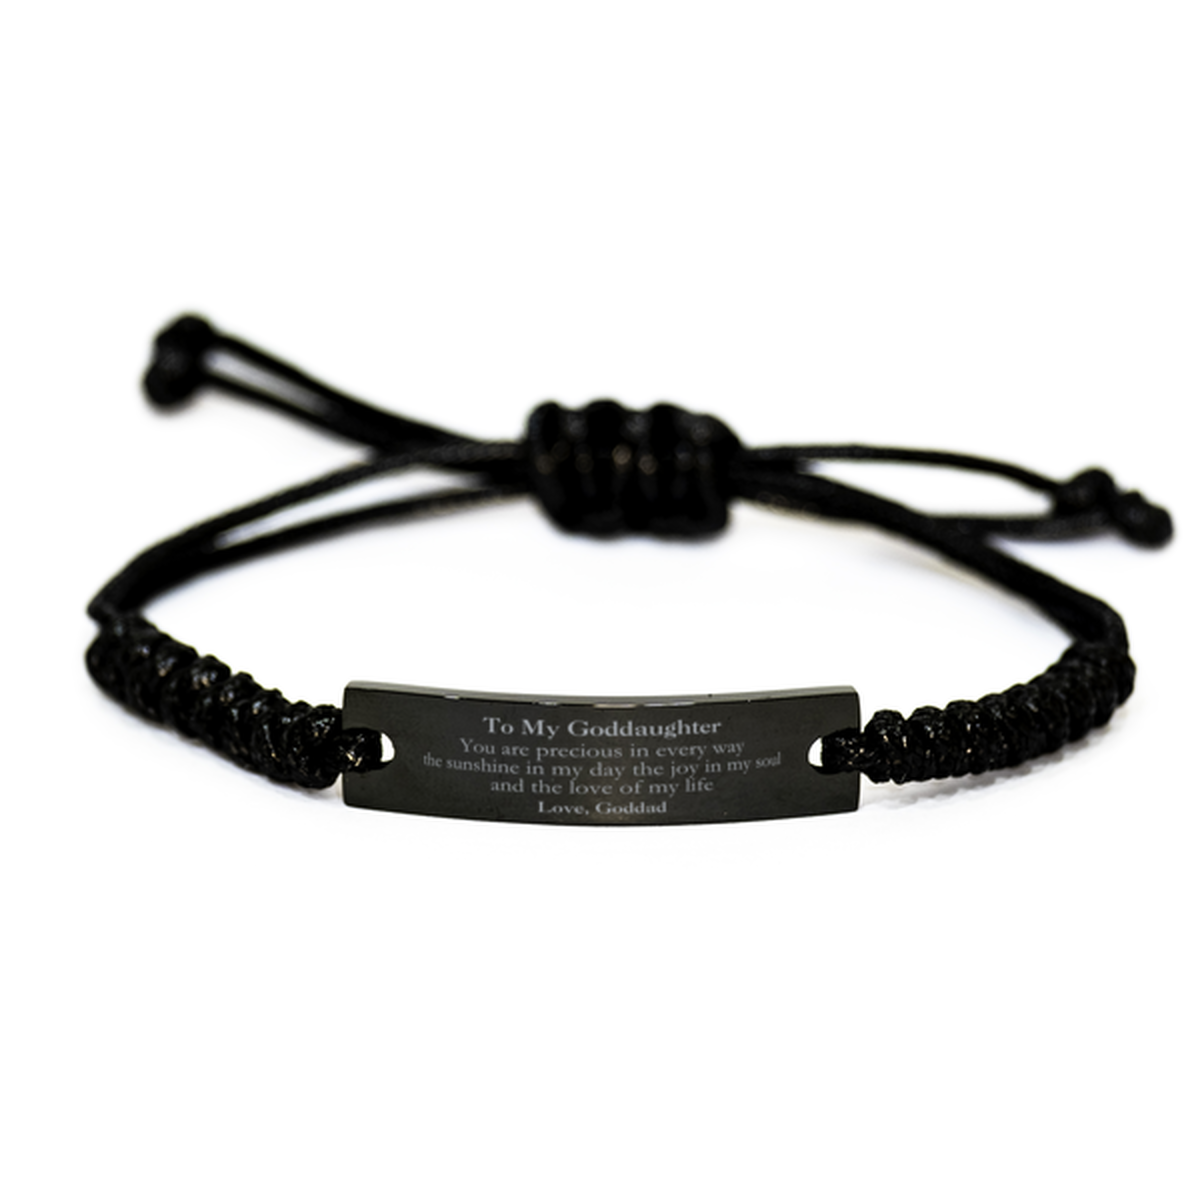 Graduation Gifts for Goddaughter Black Rope Bracelet Present from Goddad, Christmas Goddaughter Birthday Gifts Goddaughter You are precious in every way the sunshine in my day. Love, Goddad